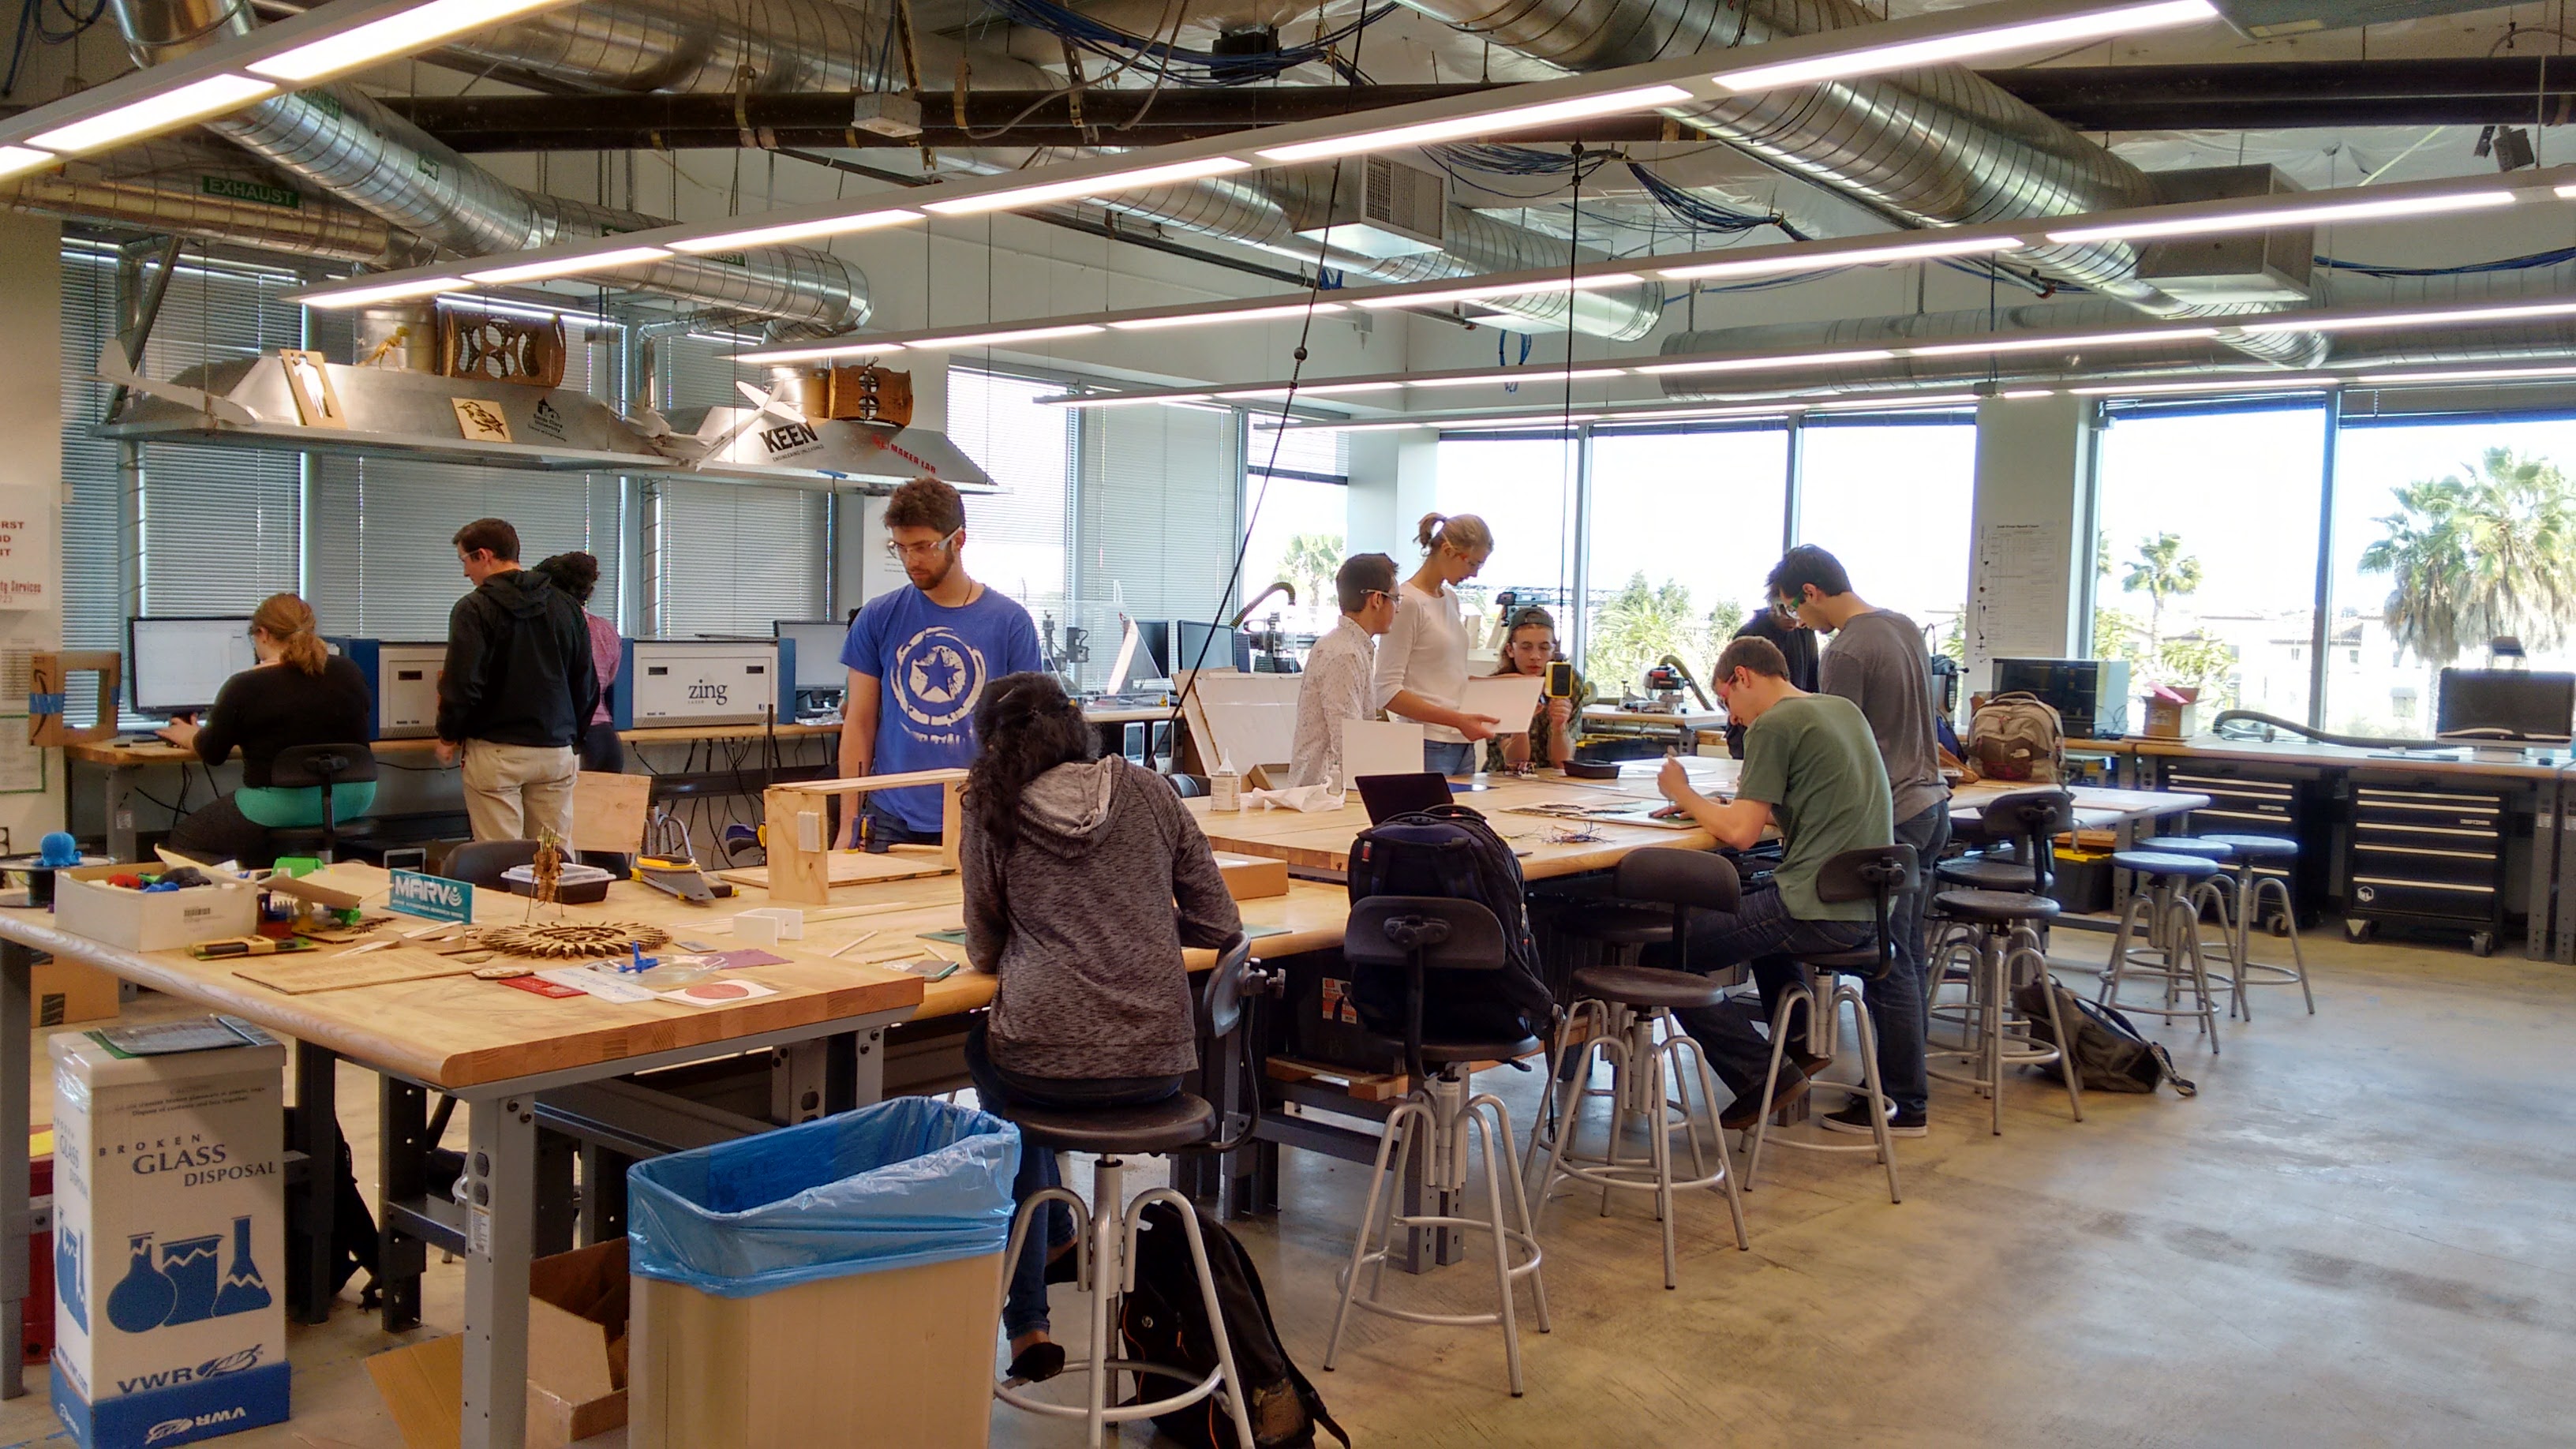 Students at work in the Maker Lab